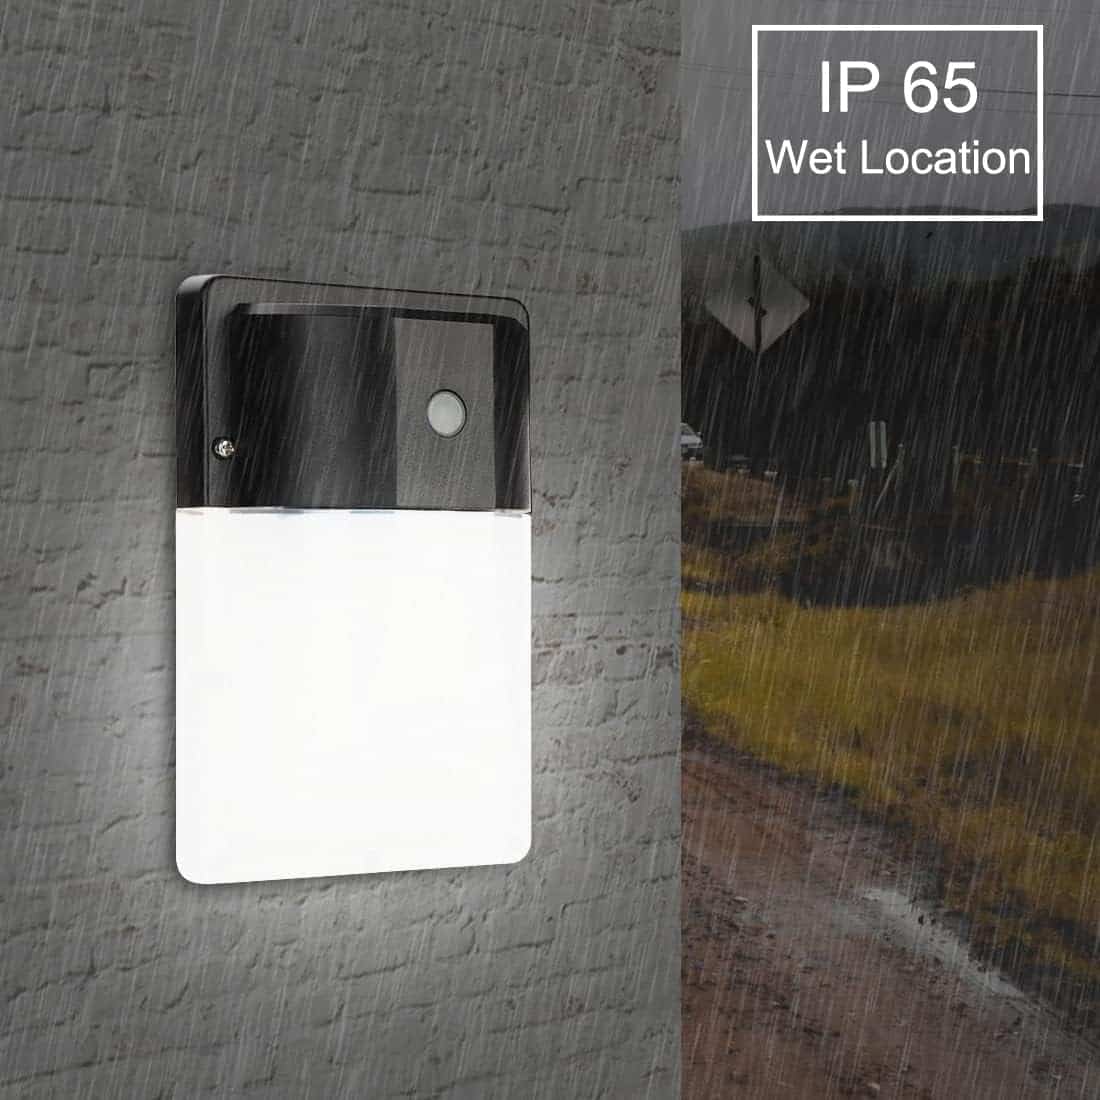 kadision LED Wall Pack Light with Dusk to Dawn Photocell, 13W 1430lm 5000K 100-277V IP65 Waterproof Outdoor Security Lights, ETL Listed, 4-Pack